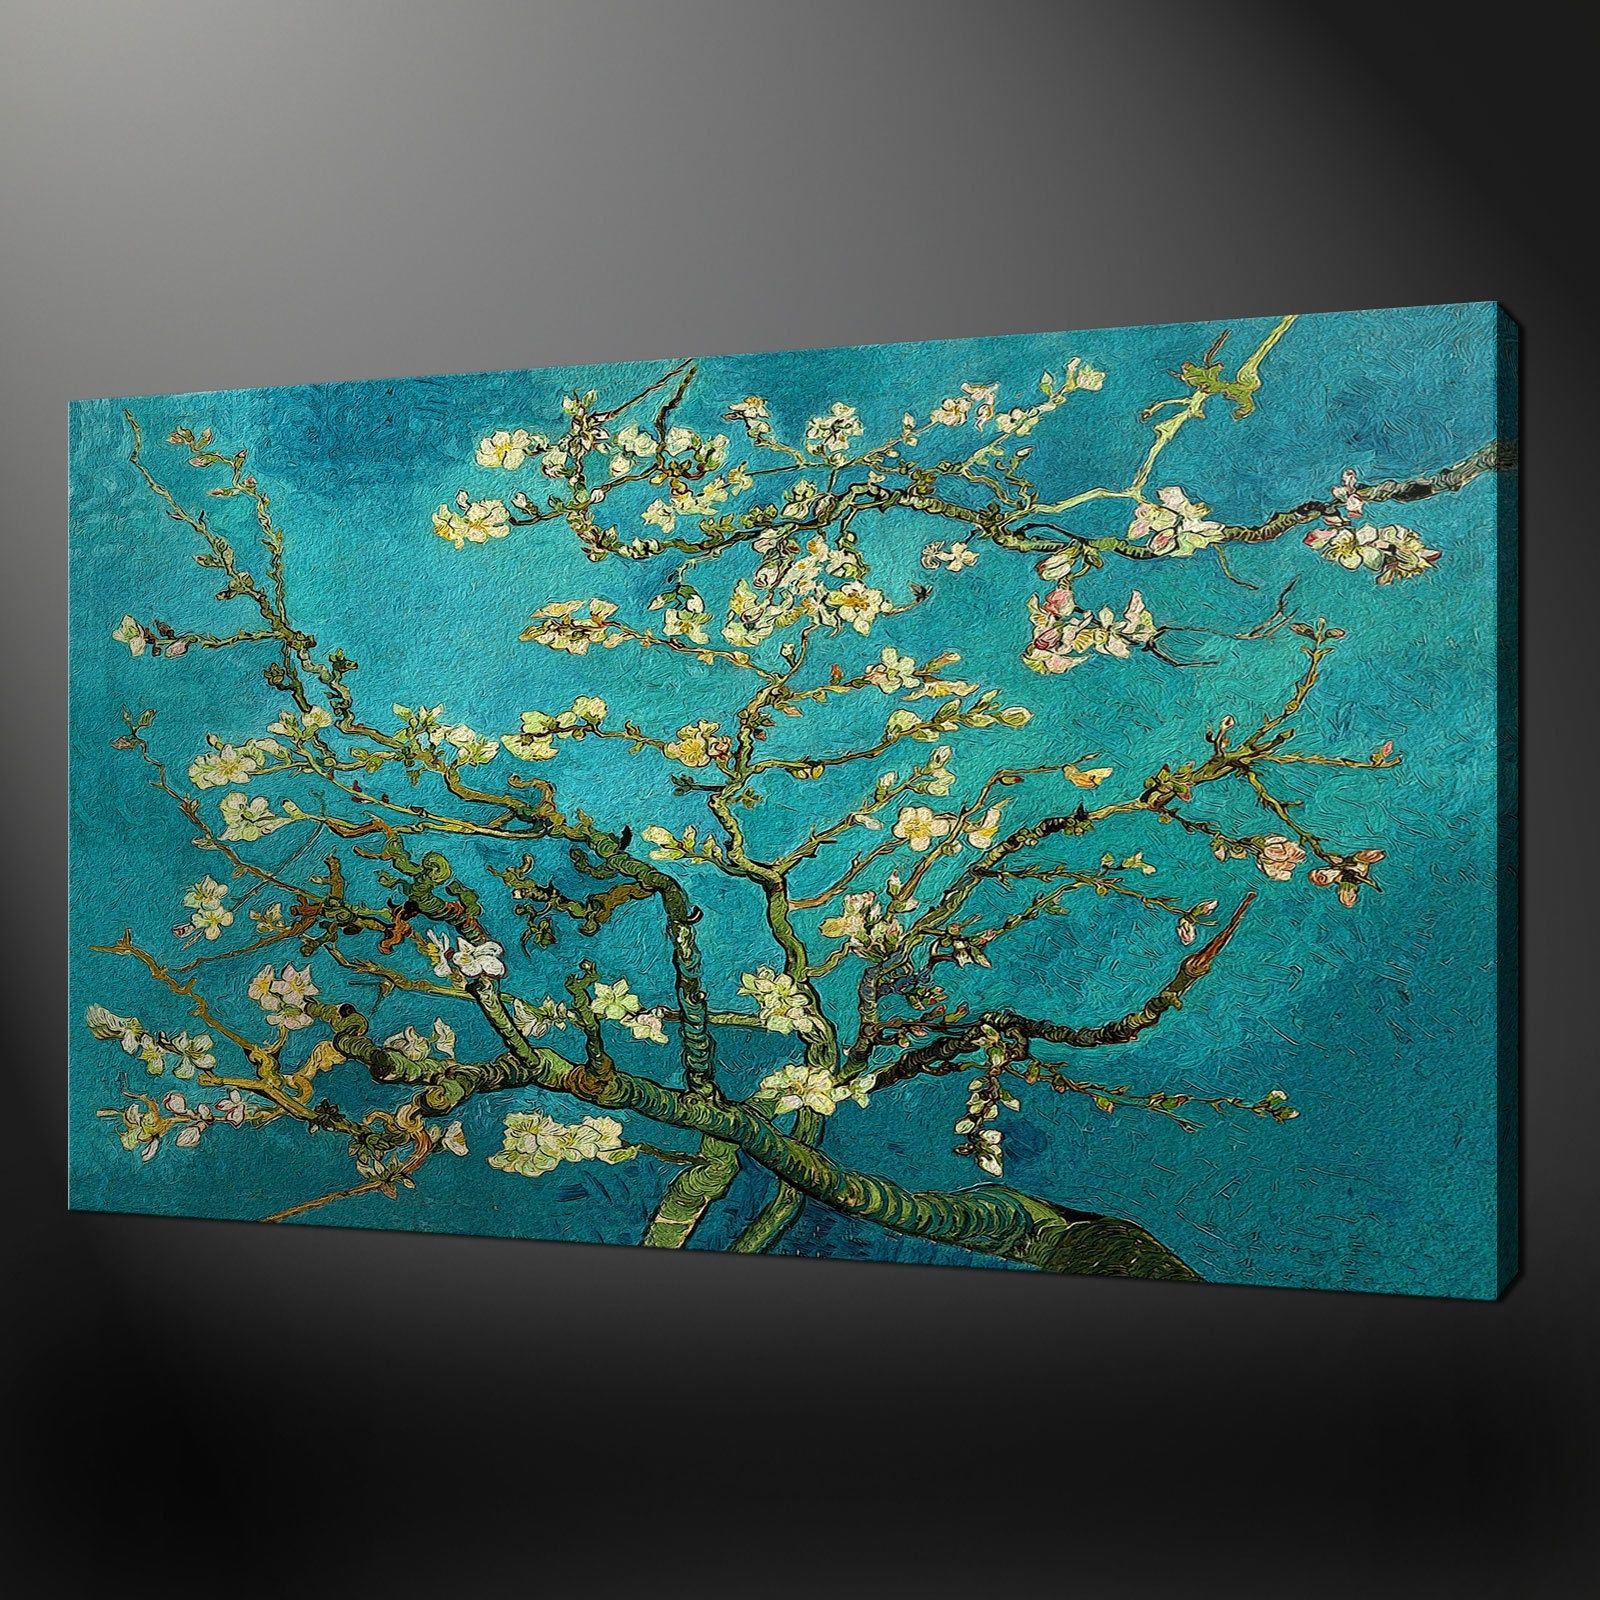 Almond Tree Van Gogh Regarding To Large Canvas Teal Wall Art Simple Inside Turquoise Wall Art (View 16 of 20)